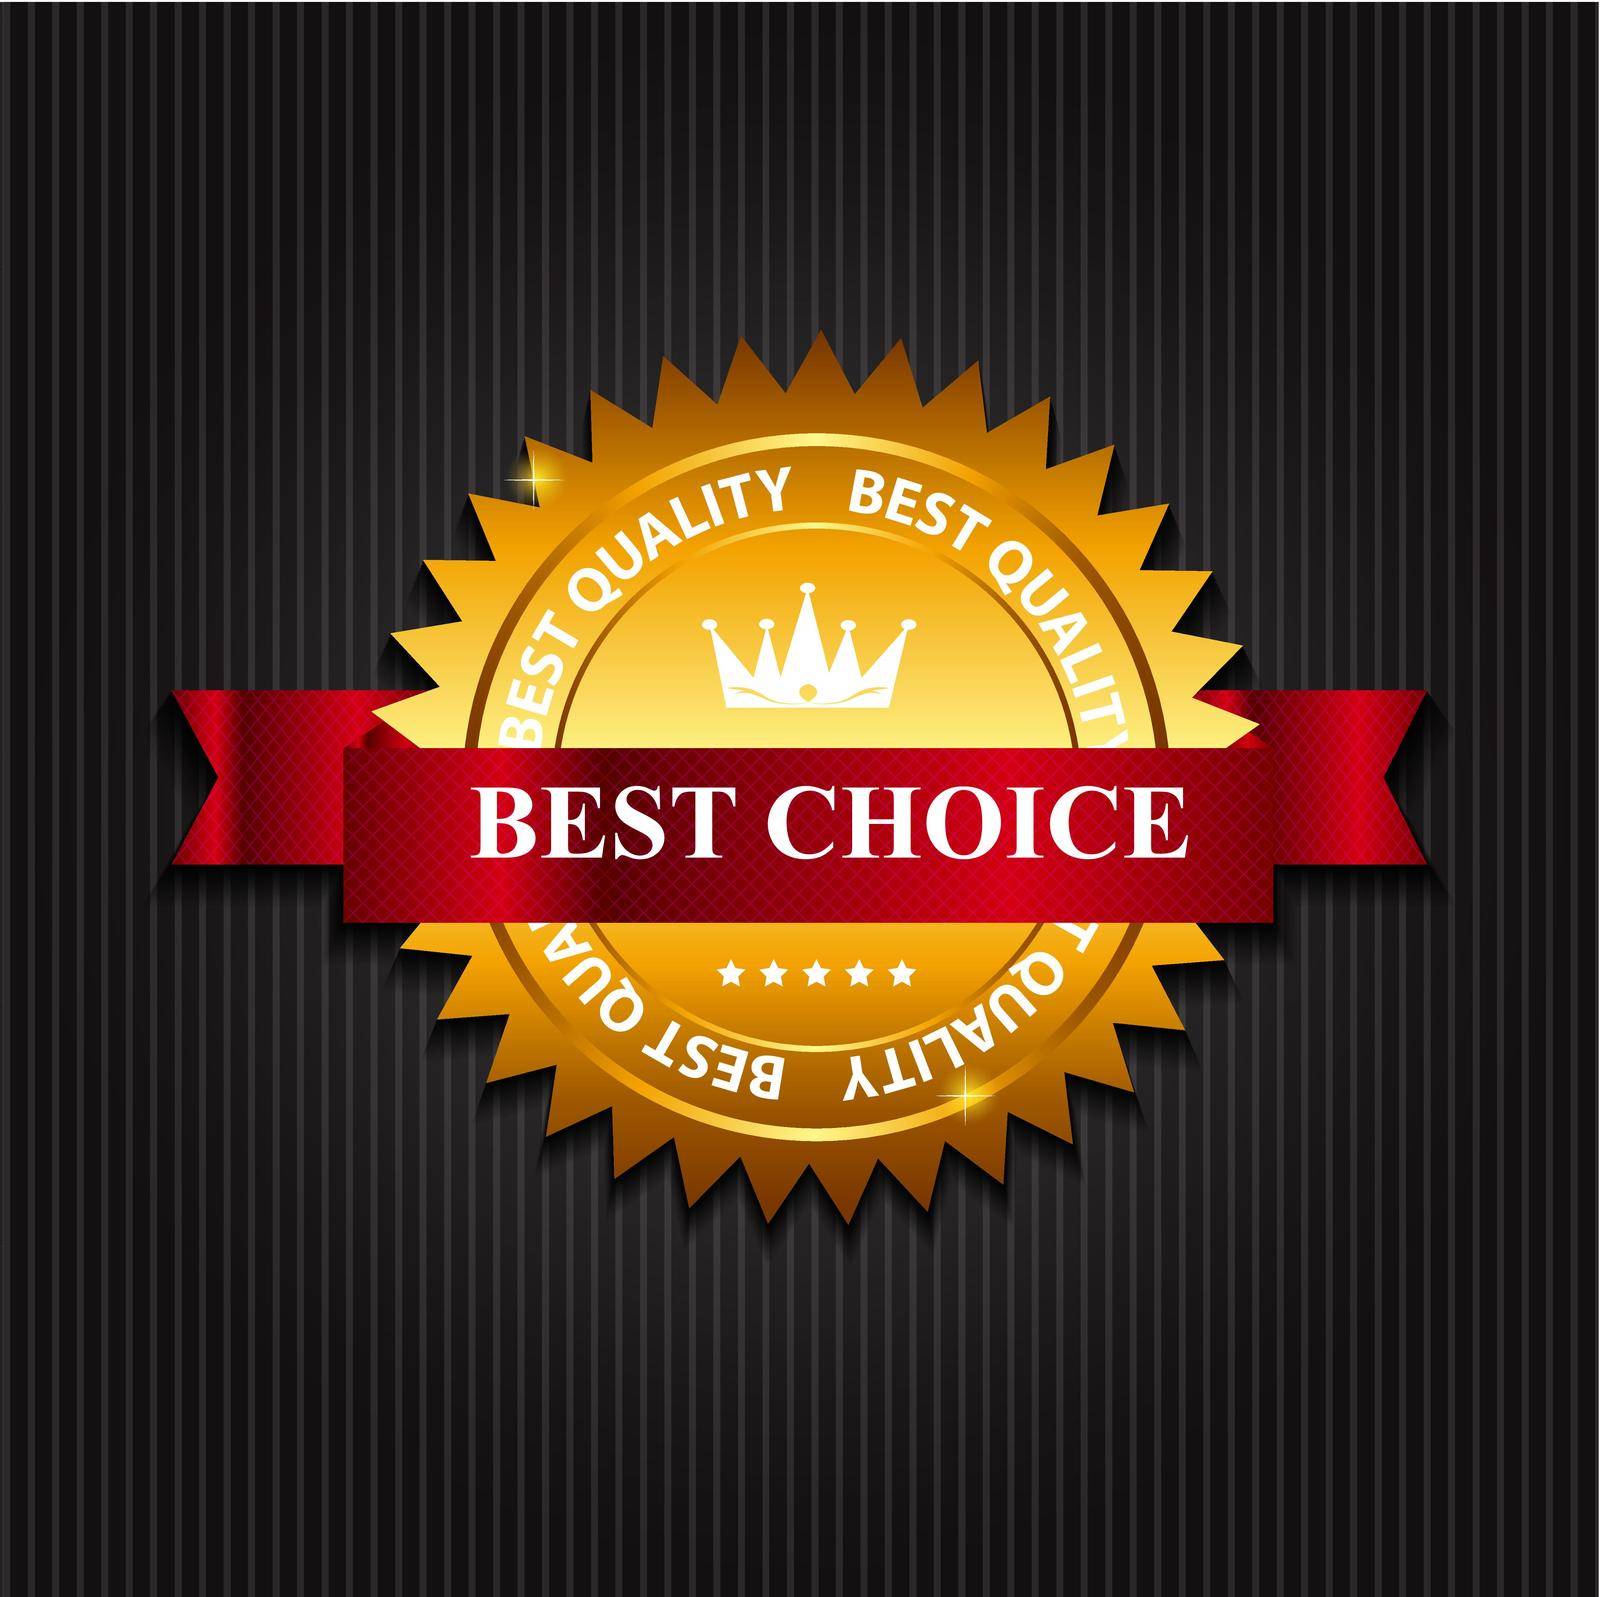 Best Choice  Label with Ribbon. Vector Illustration
